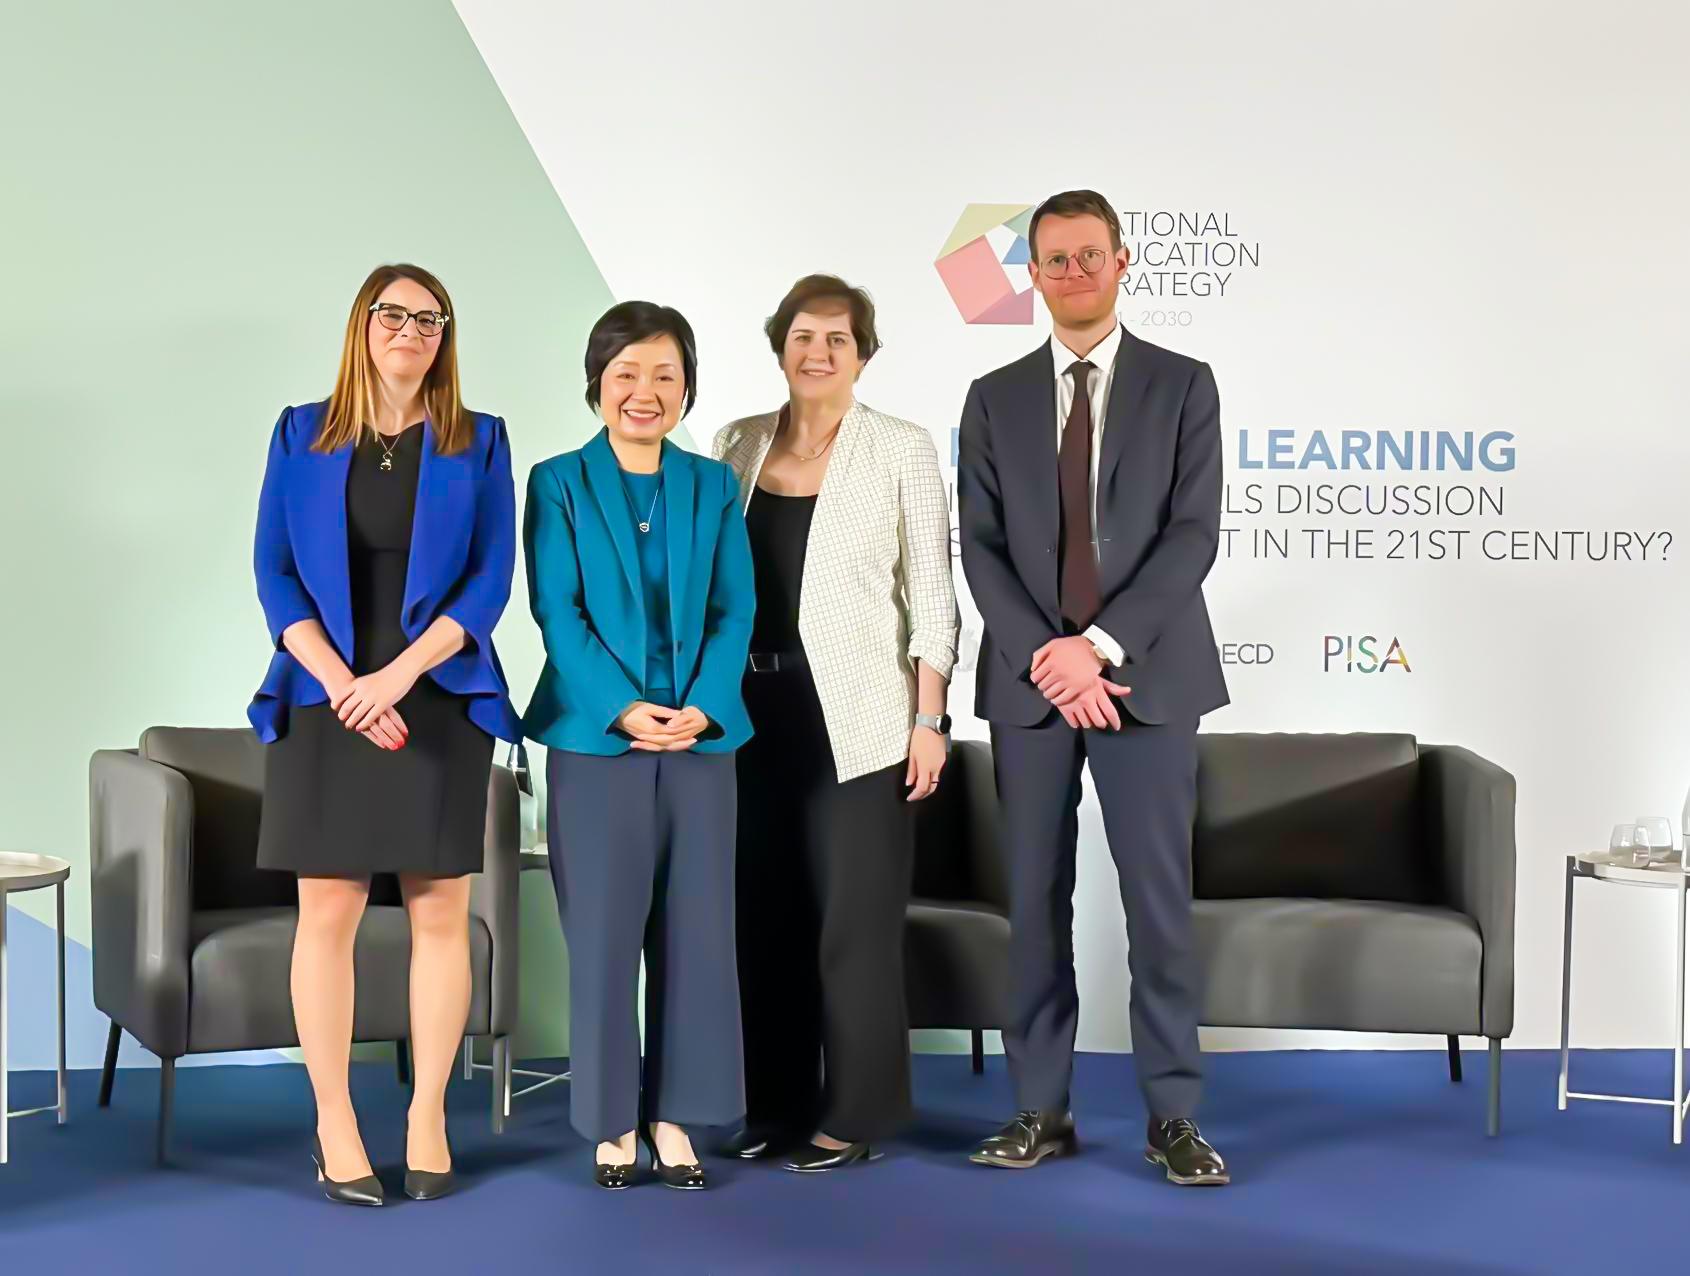 The Secretary for Education, Dr Choi Yuk-lin (second left), attended a forum on lifelong learning in Malta co-organised by the Organisation for Economic Co-operation and Development and the Ministry for Education, Sport, Youth, Research and Innovation of Malta on April 19 (Malta time), and posed with other keynote speakers.